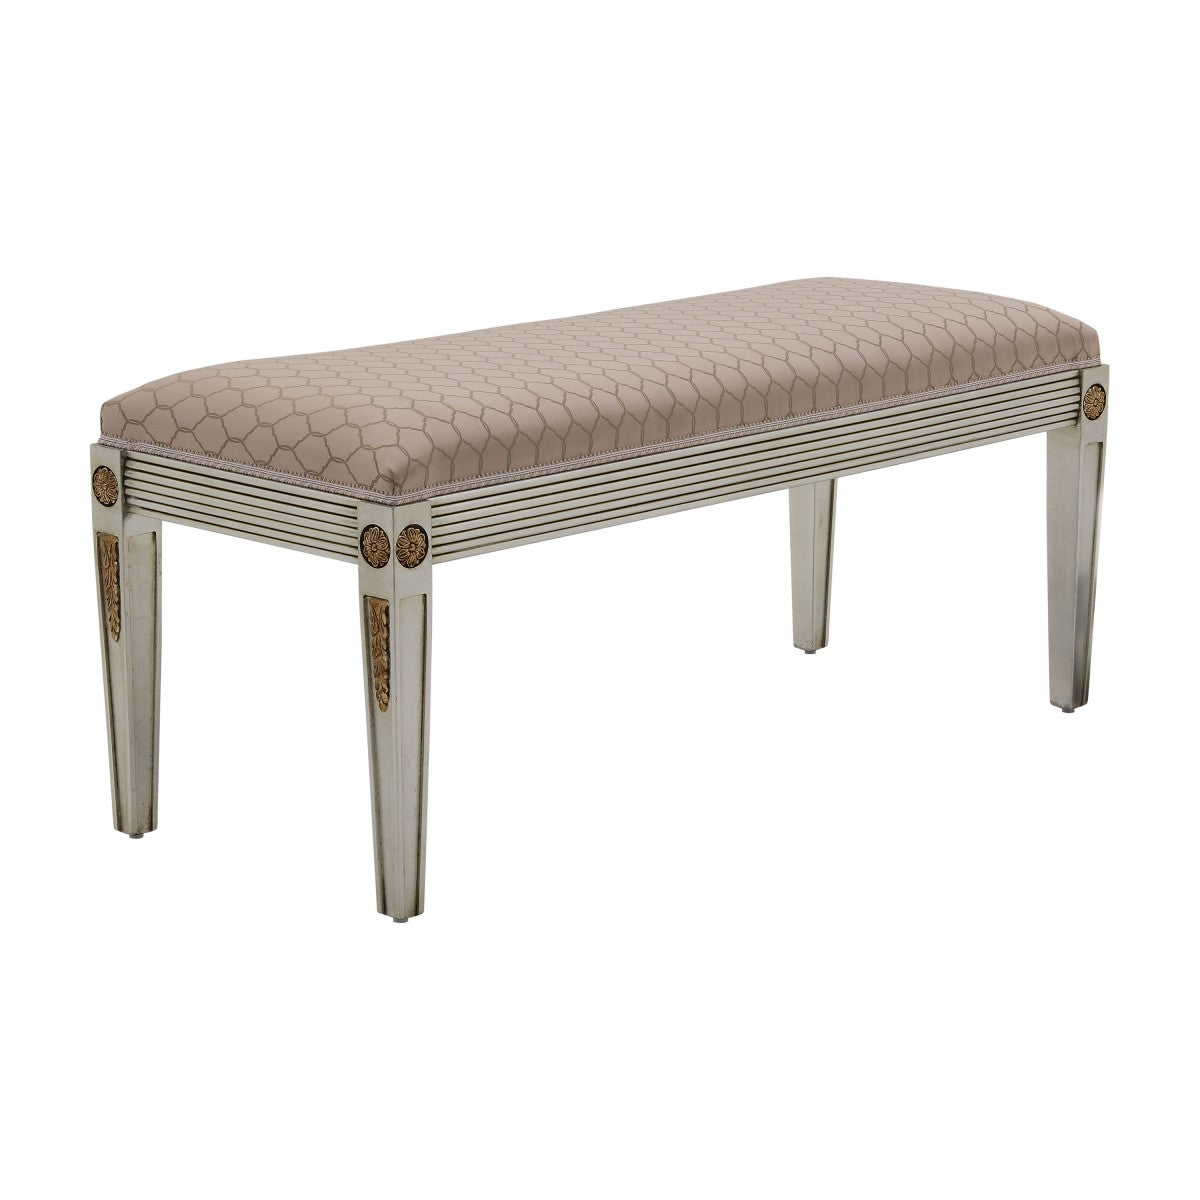 Minerva Bespoke Upholstered Classic Carved Bench MS150Q Custom Made To Order